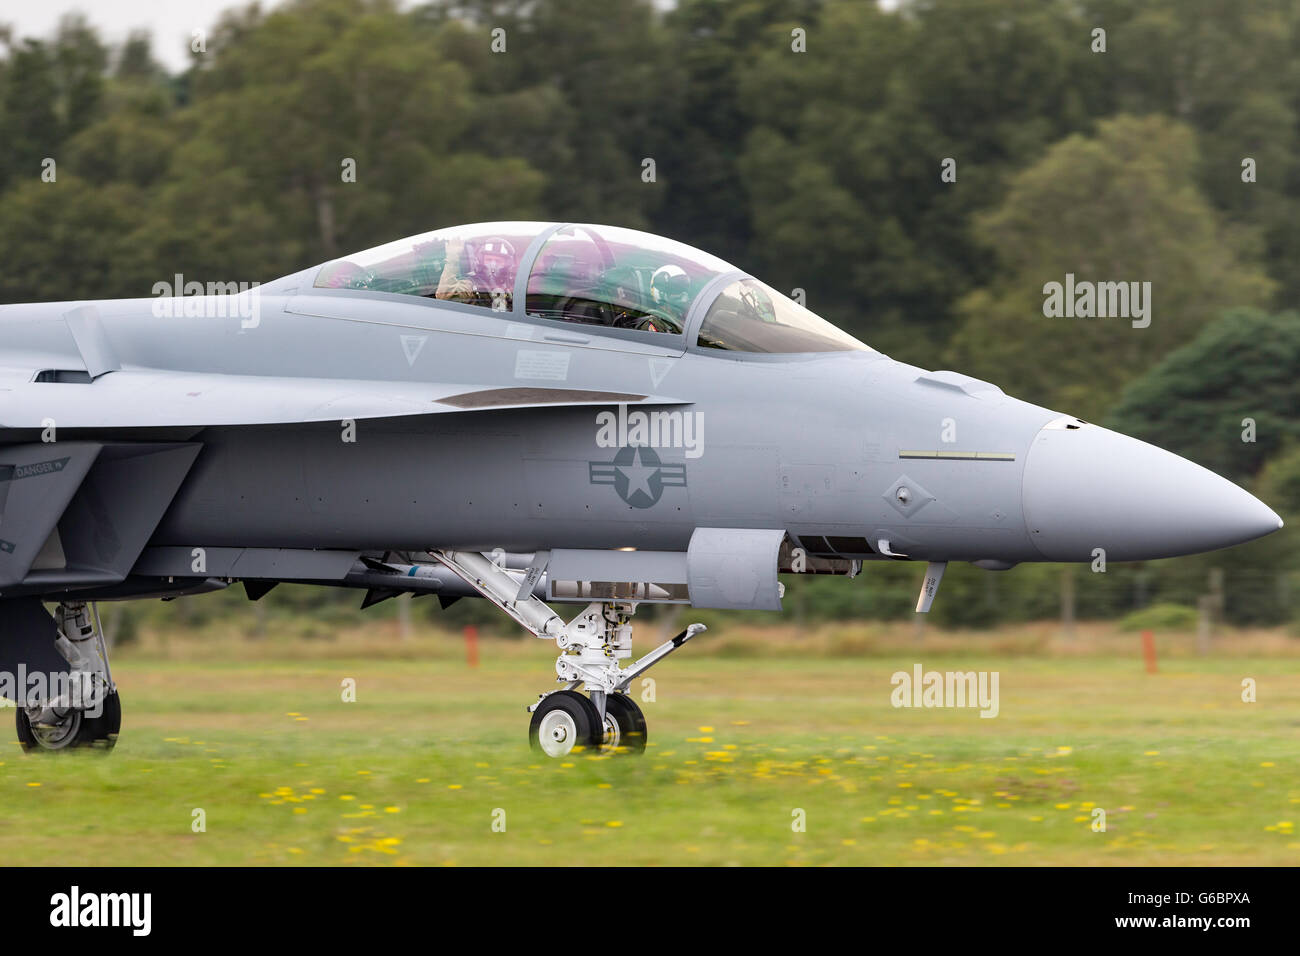 United States Navy Boeing F/A-18F Super Hornet fighter aircraft at the Farnborough International Airshow Stock Photo